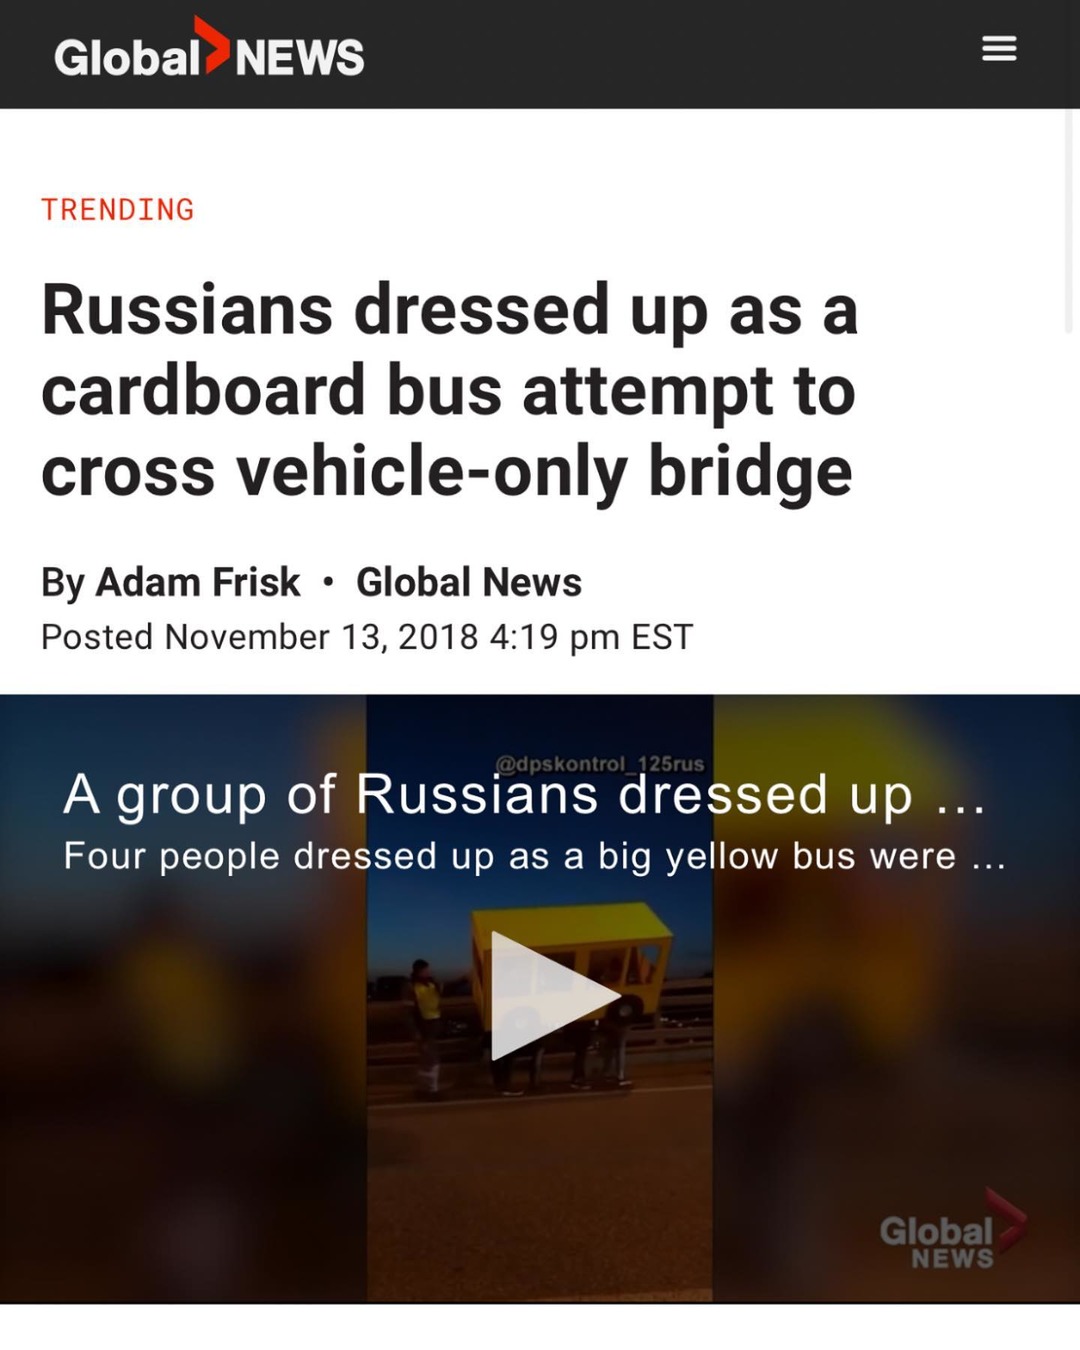 A group of Russians dressed in a cardboard cutout of a bus tried to cross a vehicle-only bridge - meme